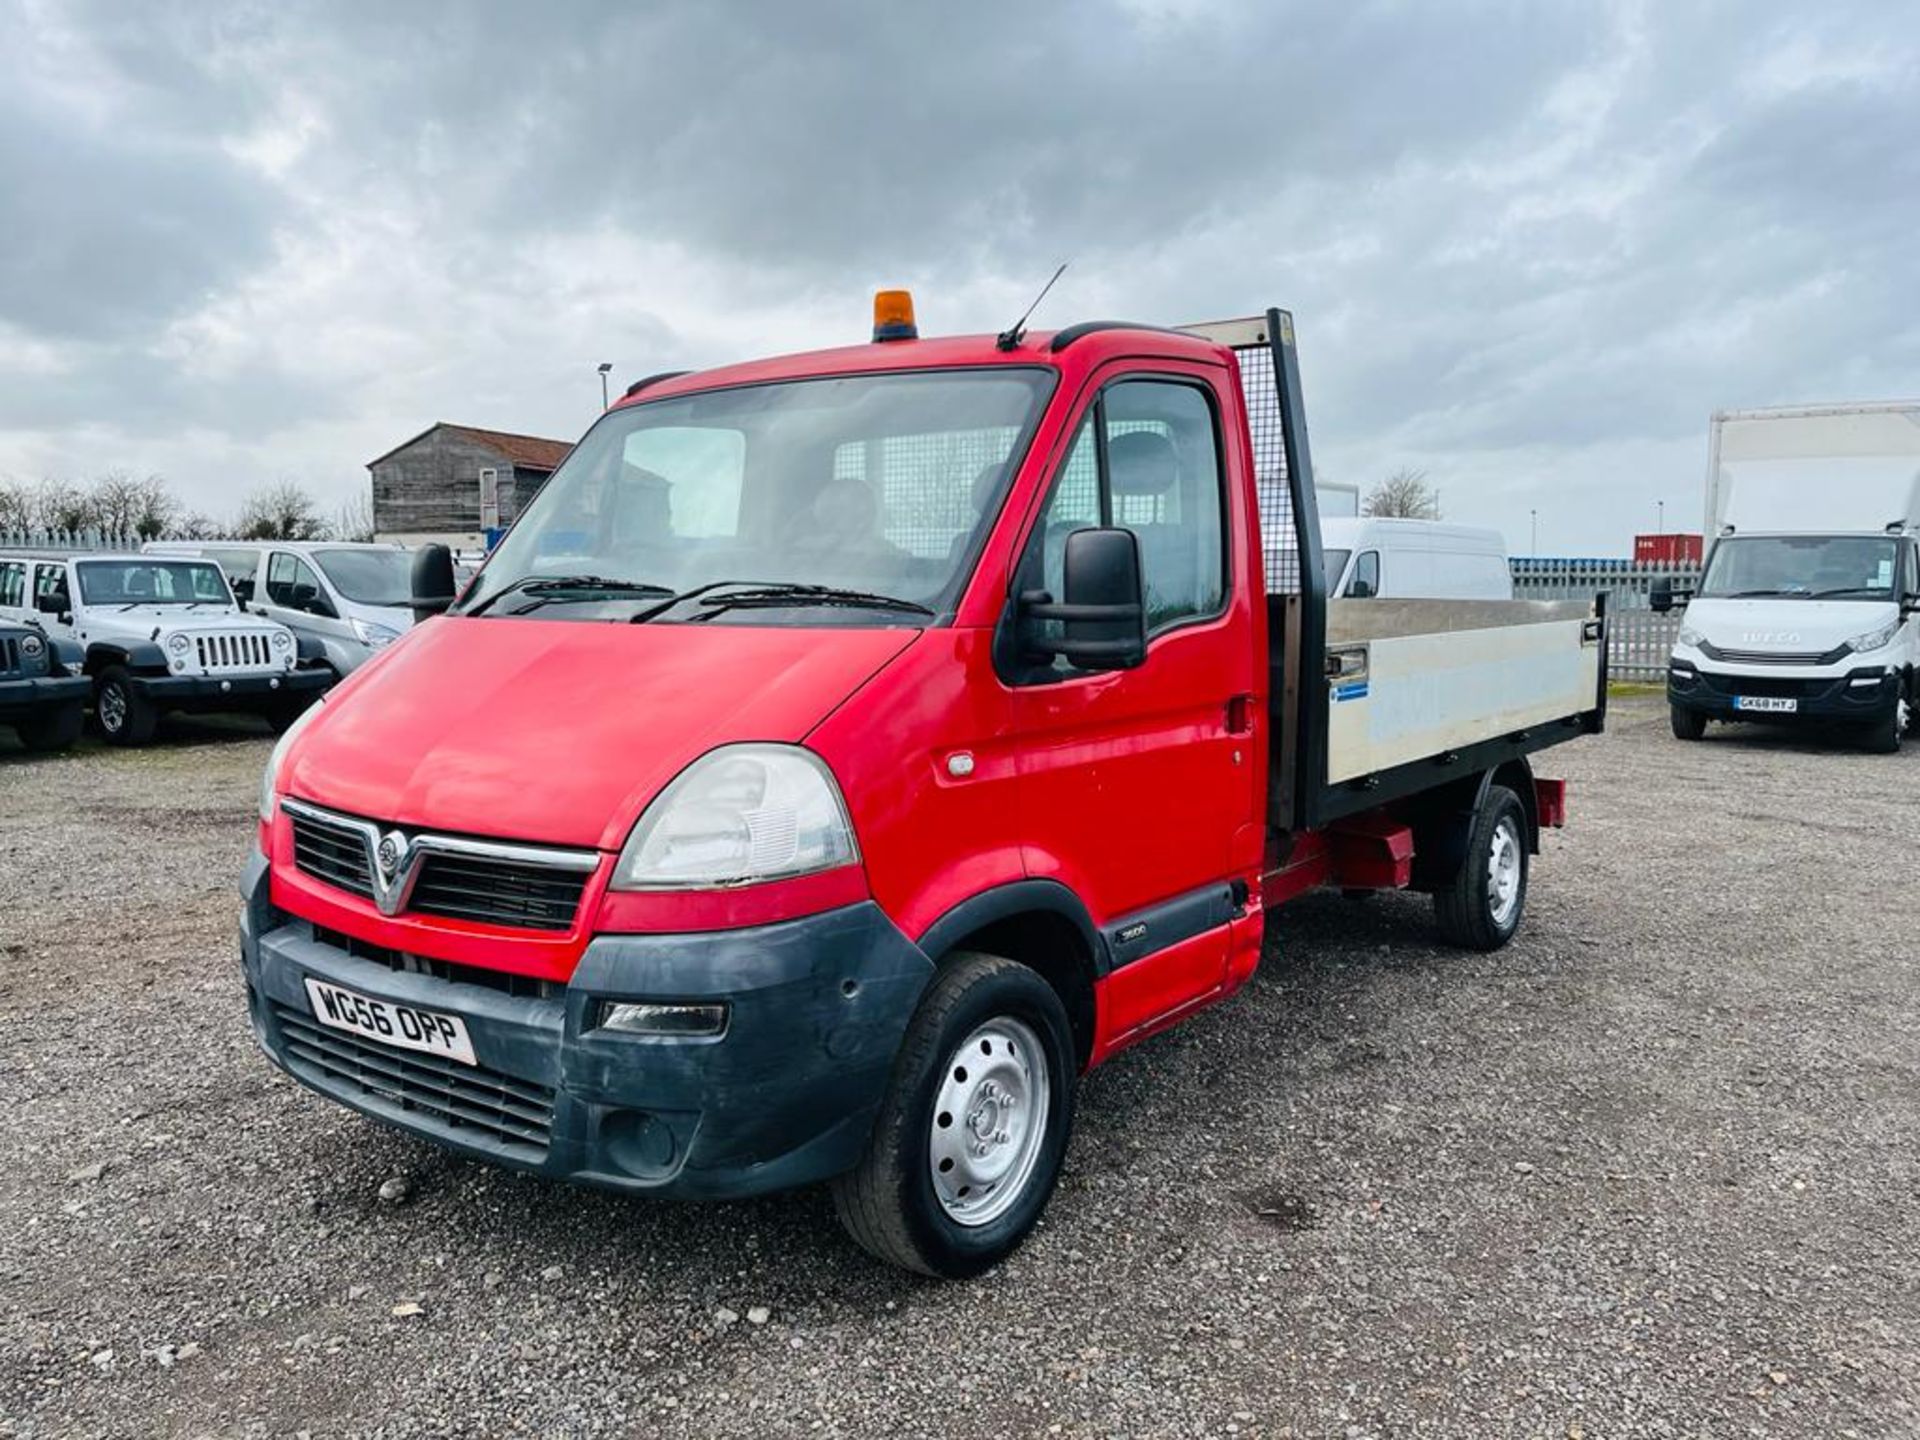 ** ON SALE ** Vauxhall Movano 2.5 CDTI 3500 L2 Tipper 2007 '56 Reg' - Only 78,295 Miles - Image 3 of 24